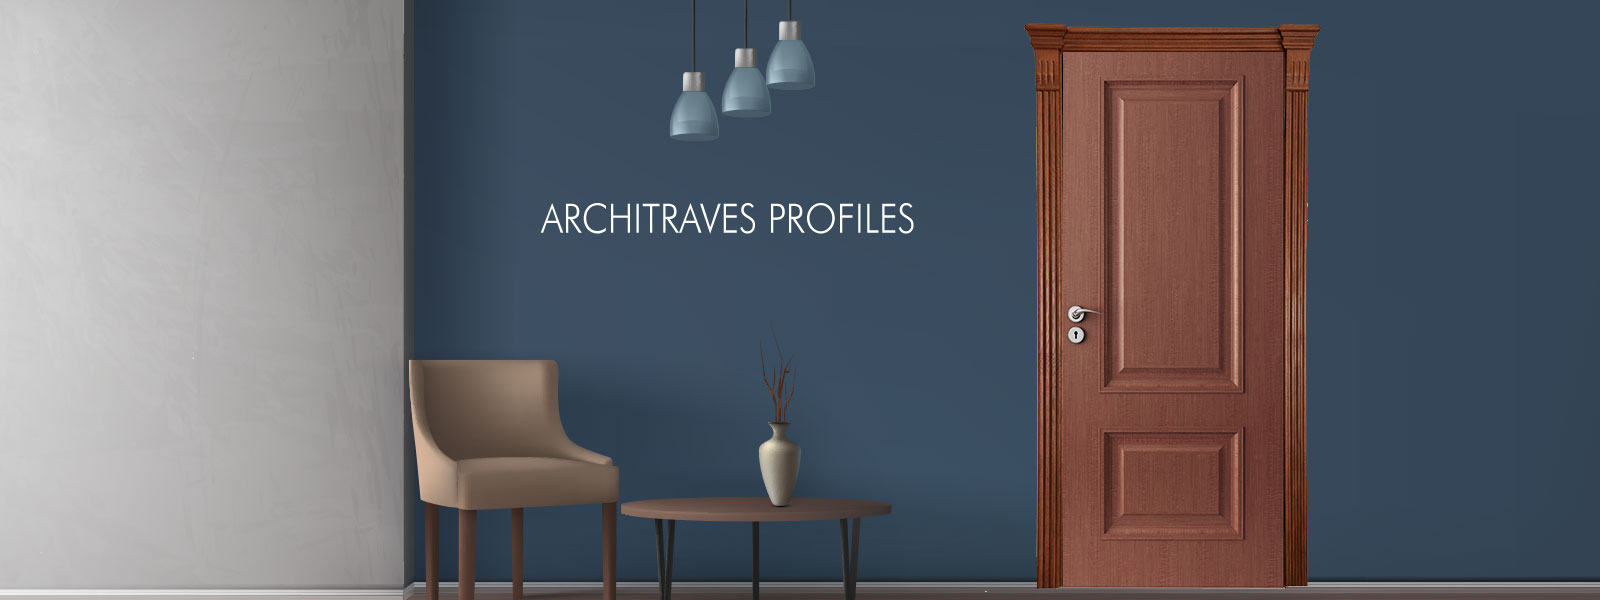 Architraves Profiles Banner Pur Fn